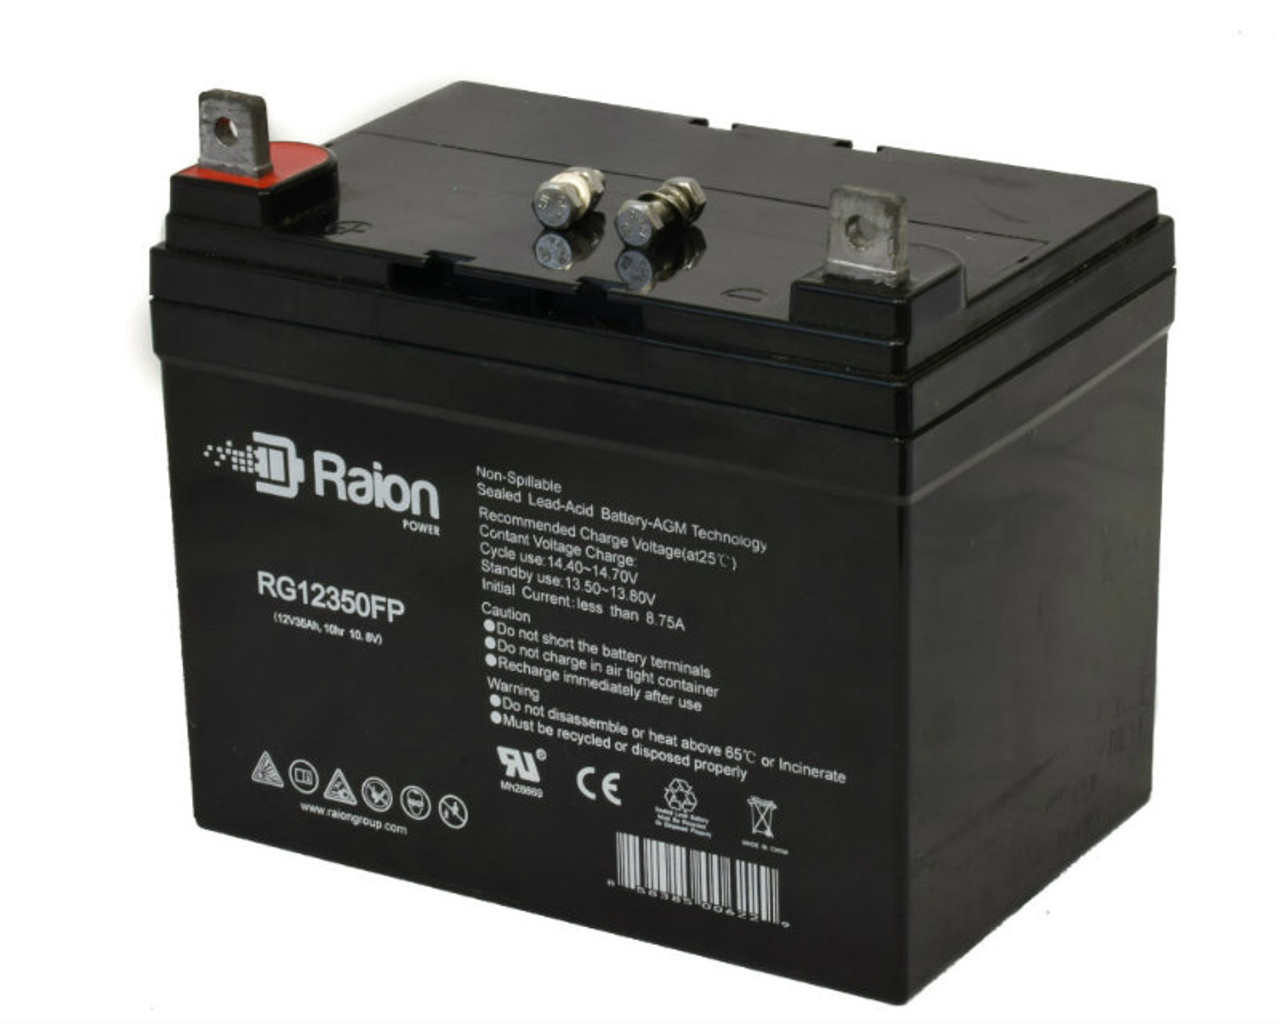 Raion Power Replacement 12V 35Ah RG12350FP Battery for Troy-Bilt 21AE682L063